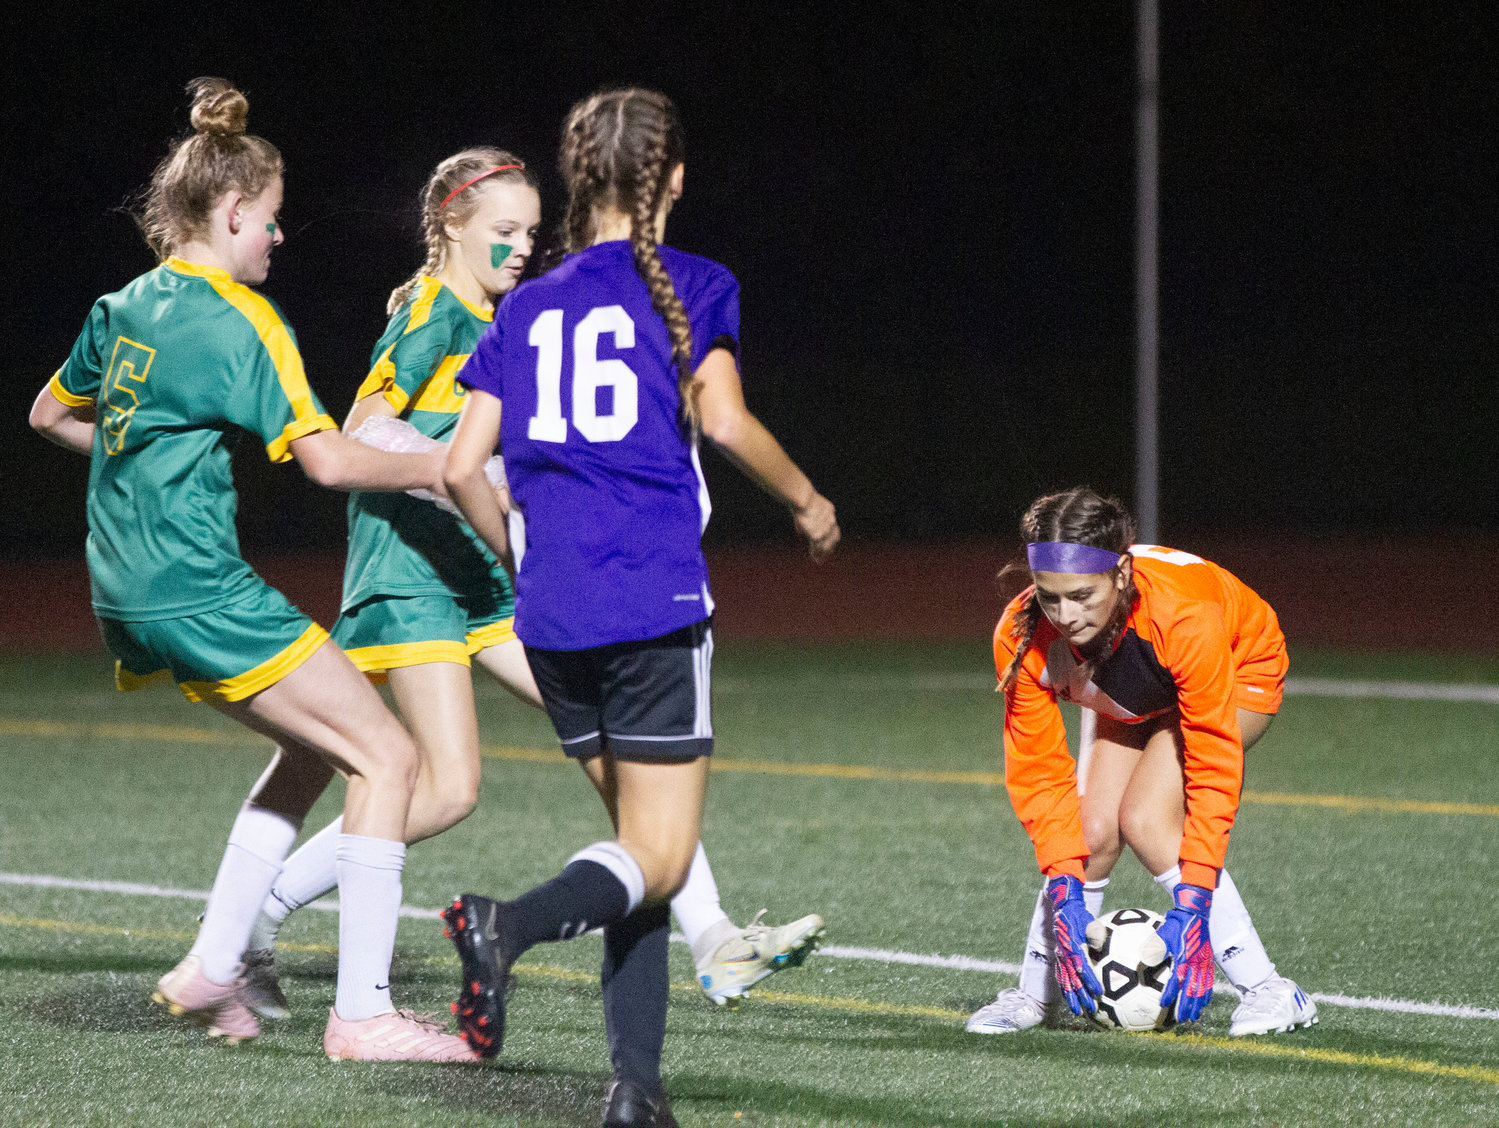 Goalkeeper Mekayla Nieves bends over to collect a weak shot by Gallagher in the final minutes of the game.